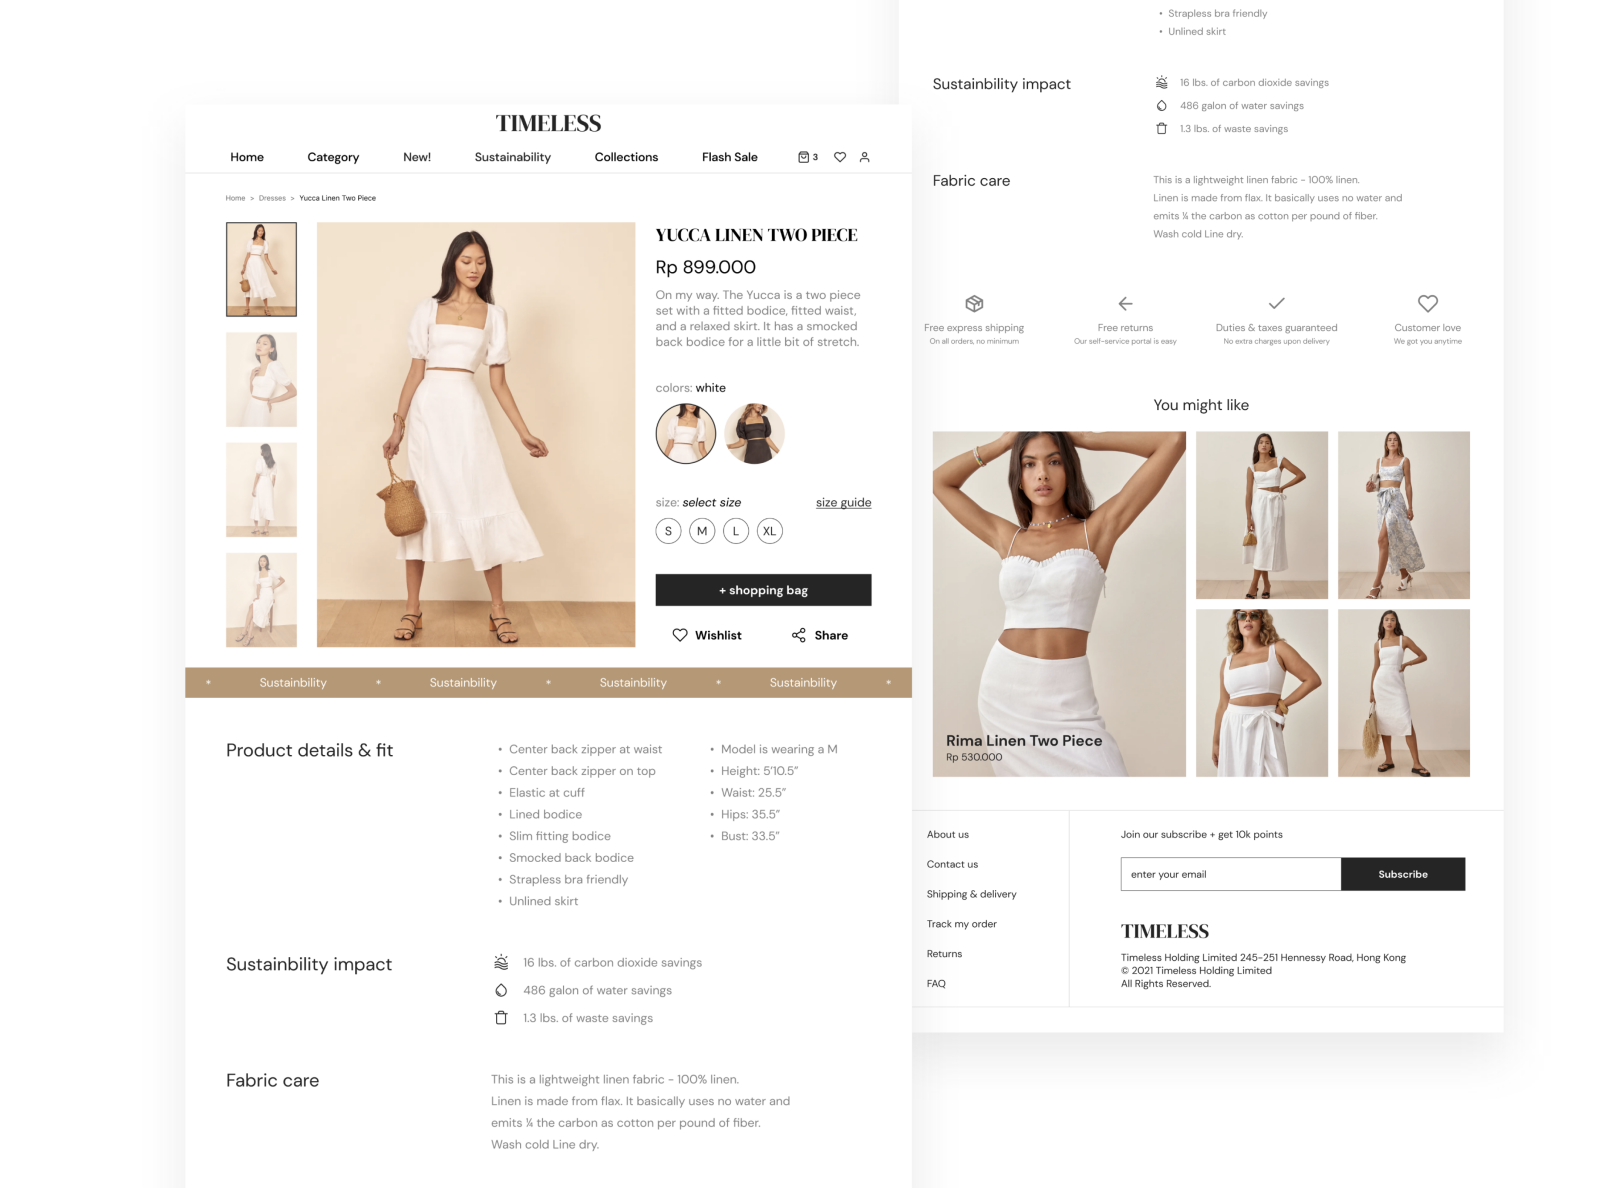 Timeless is the new trend by Ismawati Nurjannah on Dribbble